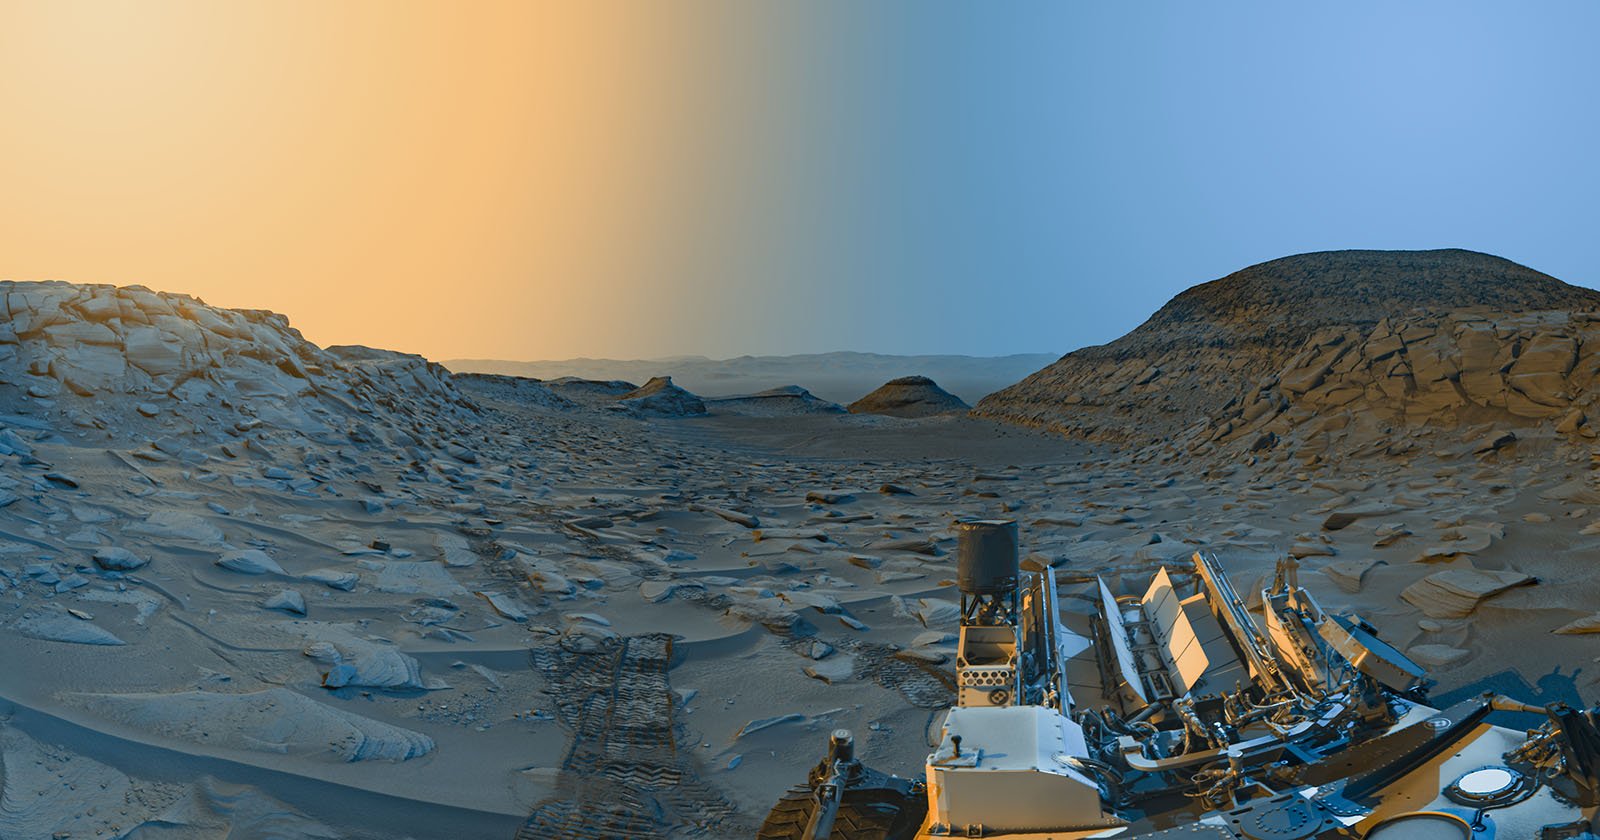 The Inside Story Behind Curiositys Time-Blended Mars Panorama